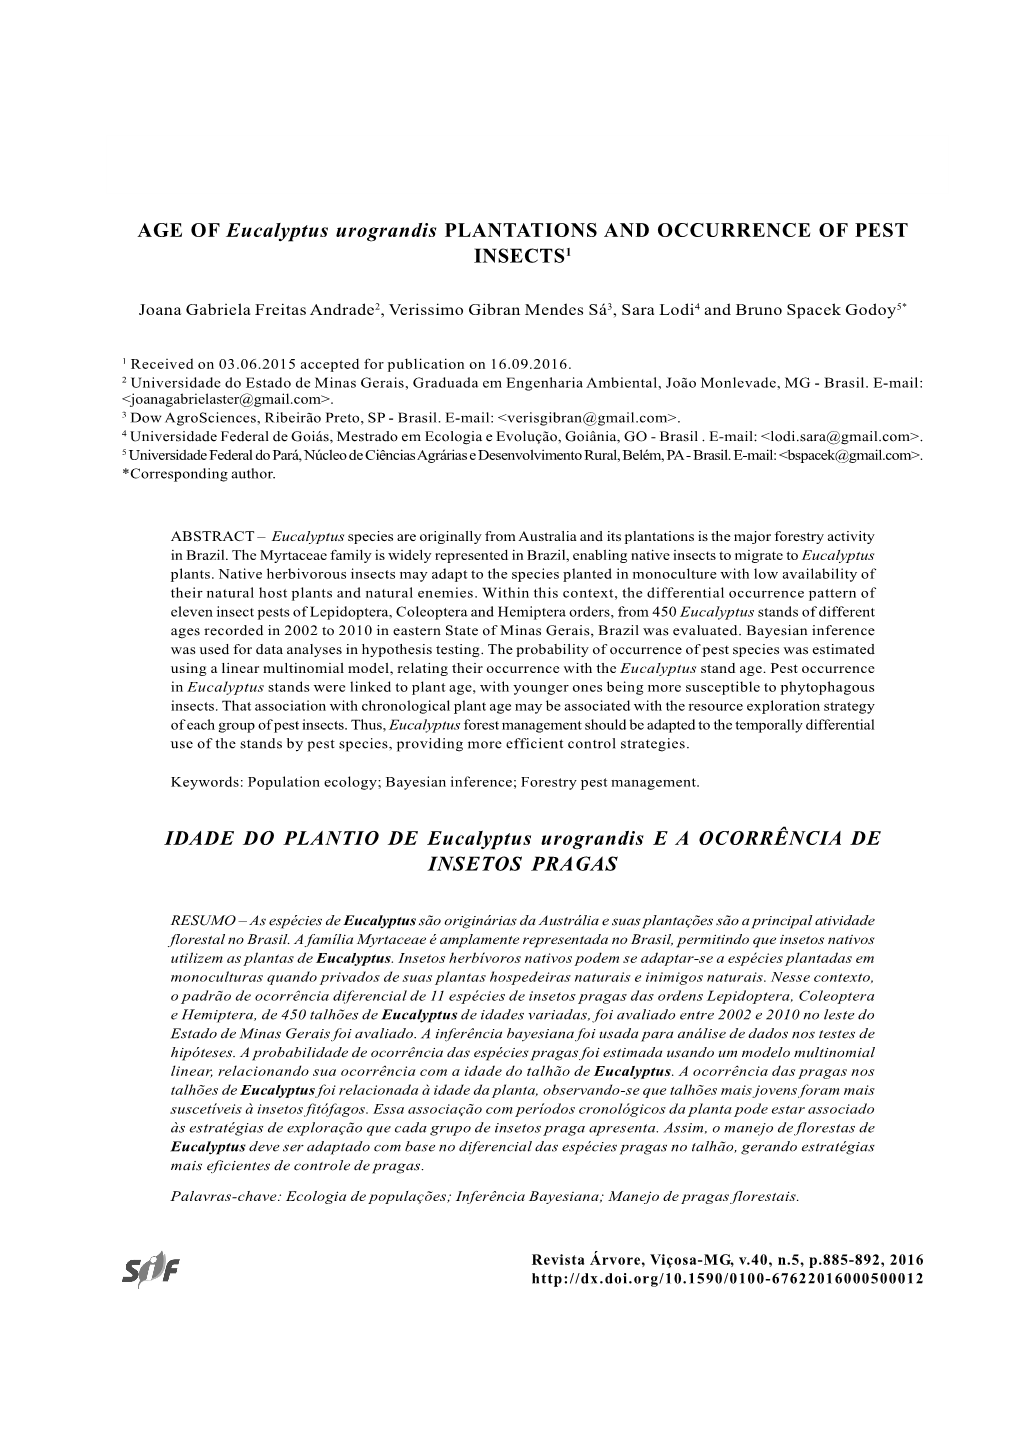 AGE of Eucalyptus Urograndis PLANTATIONS and OCCURRENCE of PEST INSECTS1